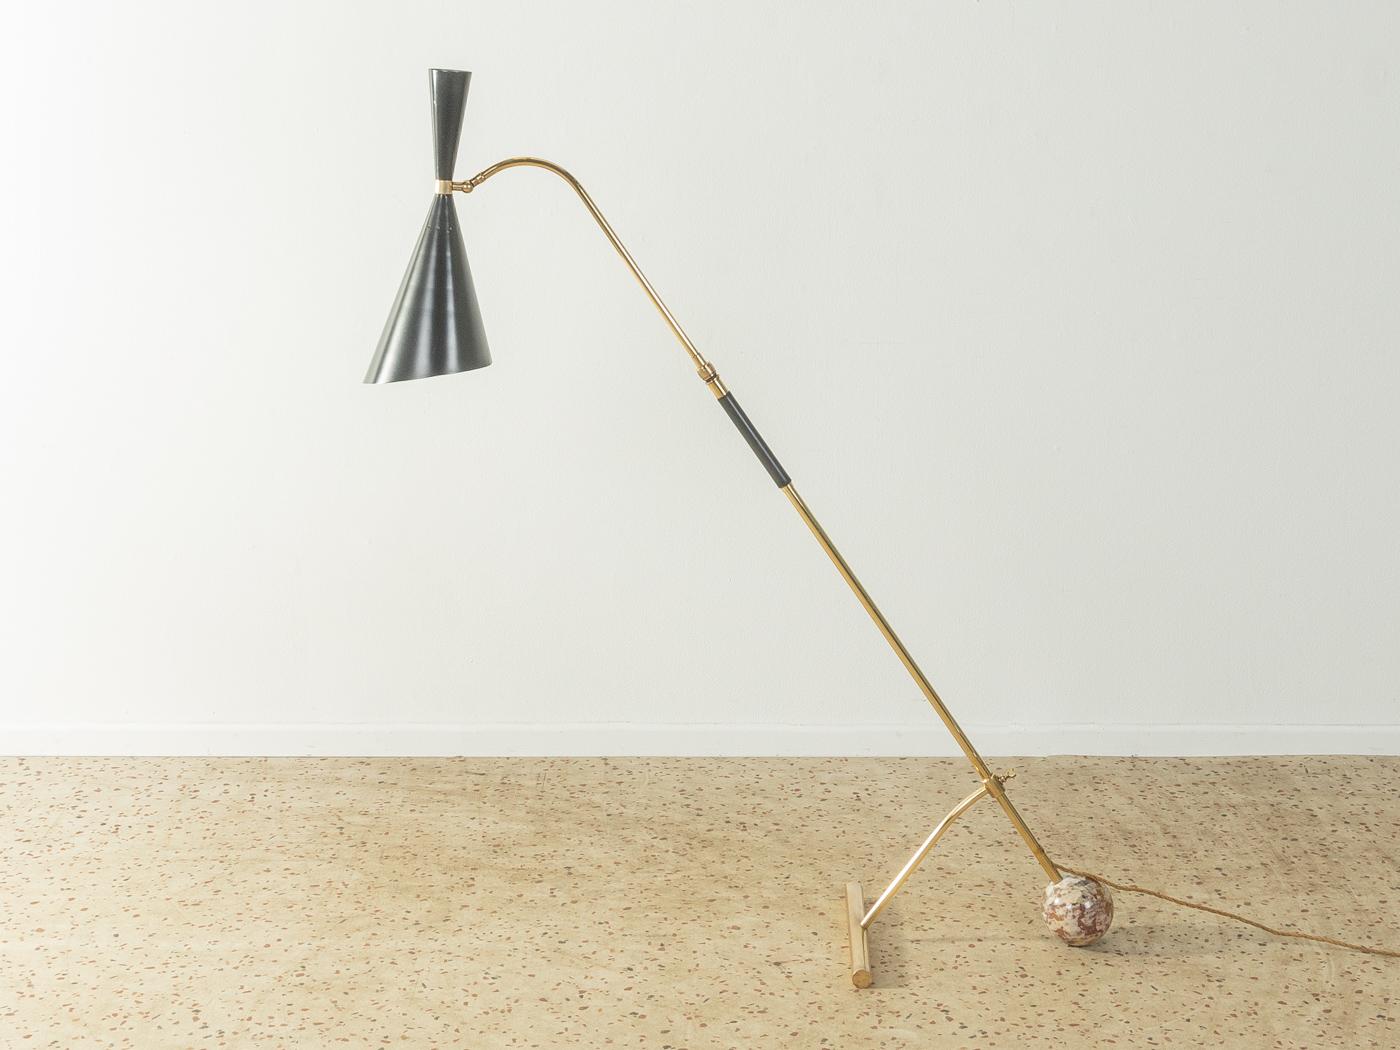 Rare Italian floor lamp from the 1950s by Stilnovo with a height-adjustable brass frame, ball-shaped marble base in beige/red and a black diabolo lamp shade.

Height 142 - 194 cm
Depth 75 - 90 cm
Lampshade Ø approx. 18 cm

Quality Features:
